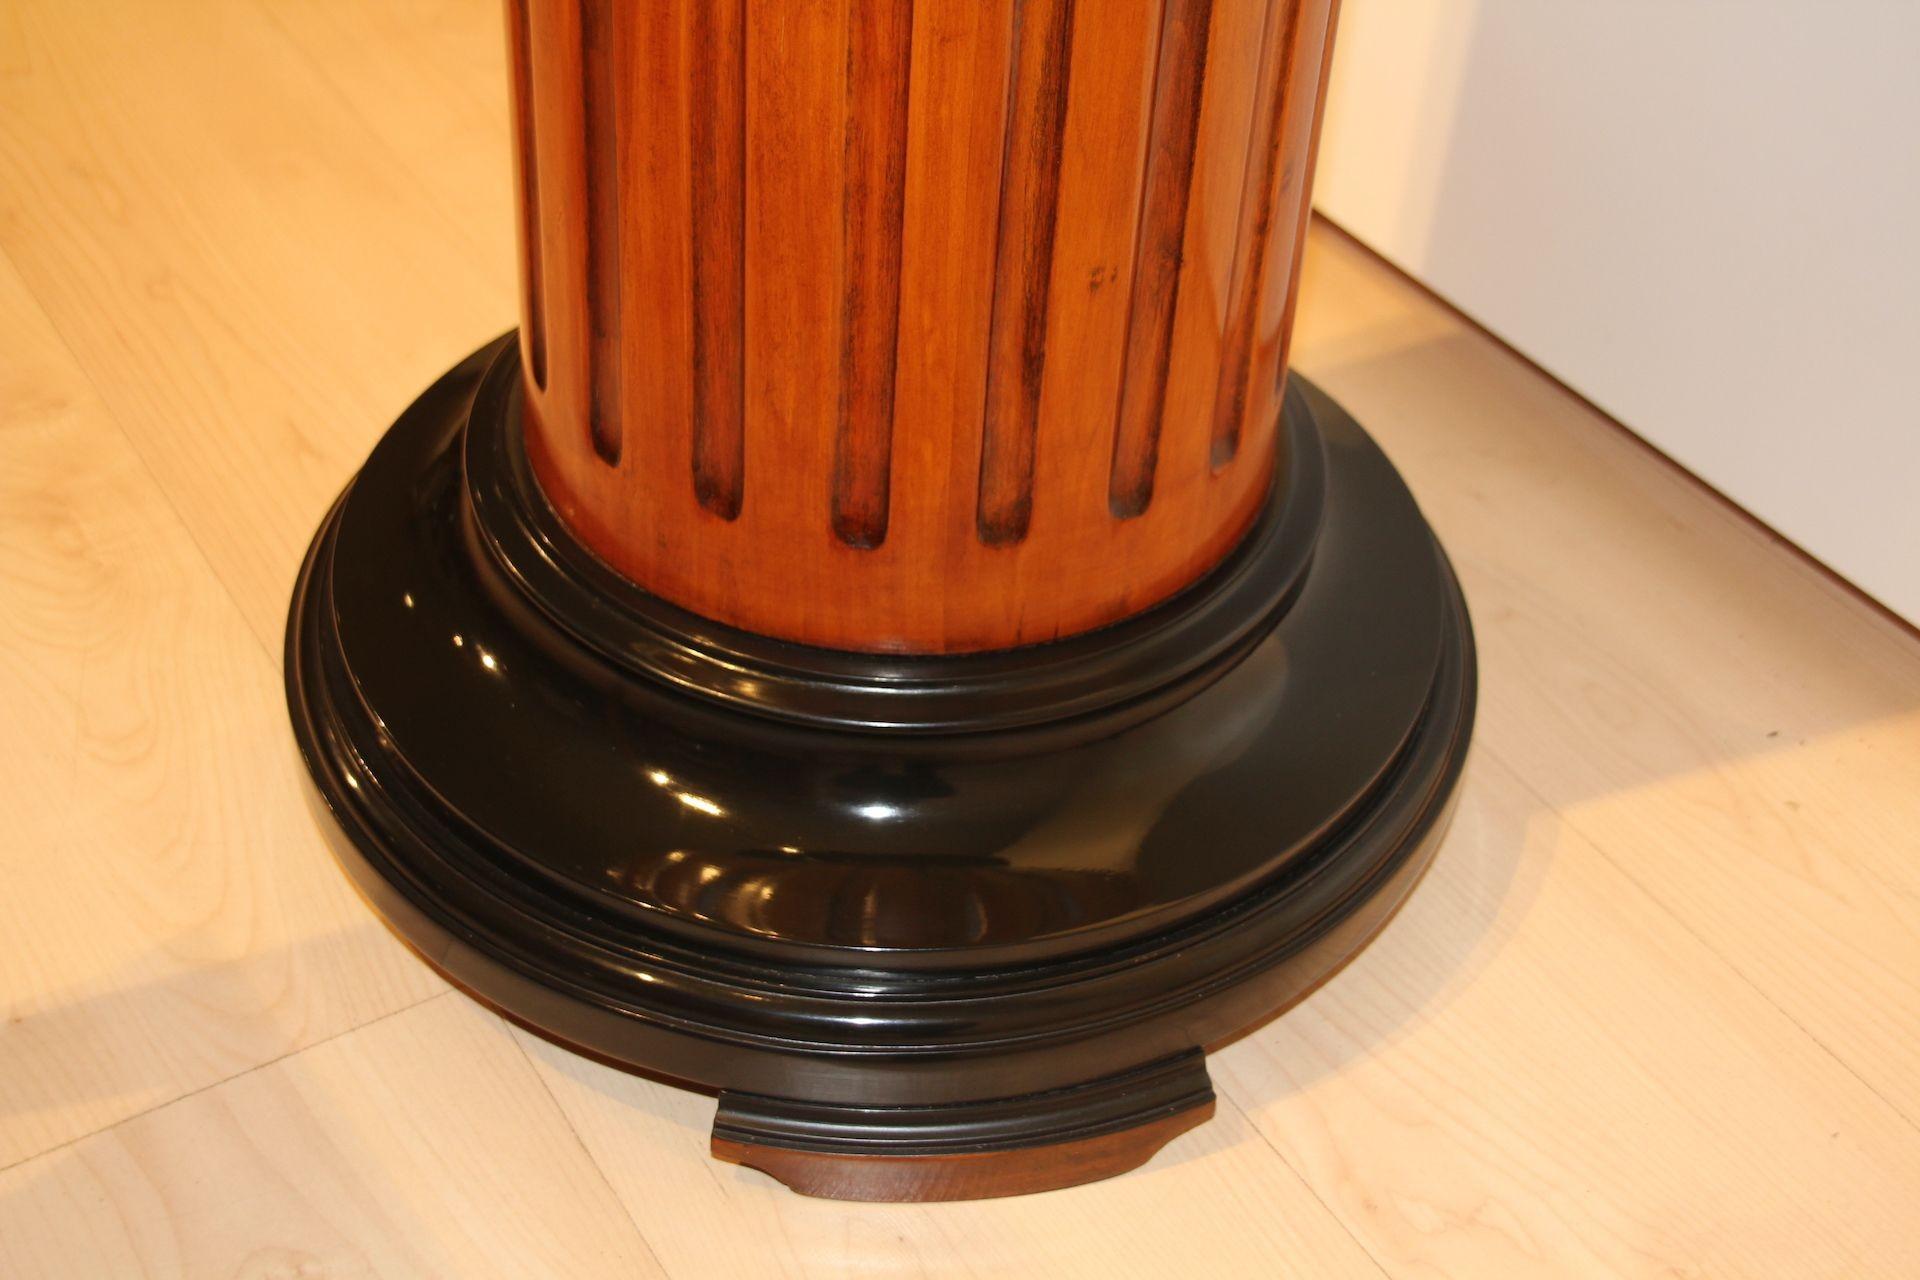 Early 20th Century Neoclassical Rotating Pedestal, Beech Wood, French Polished, Germany, Circa 1920 For Sale